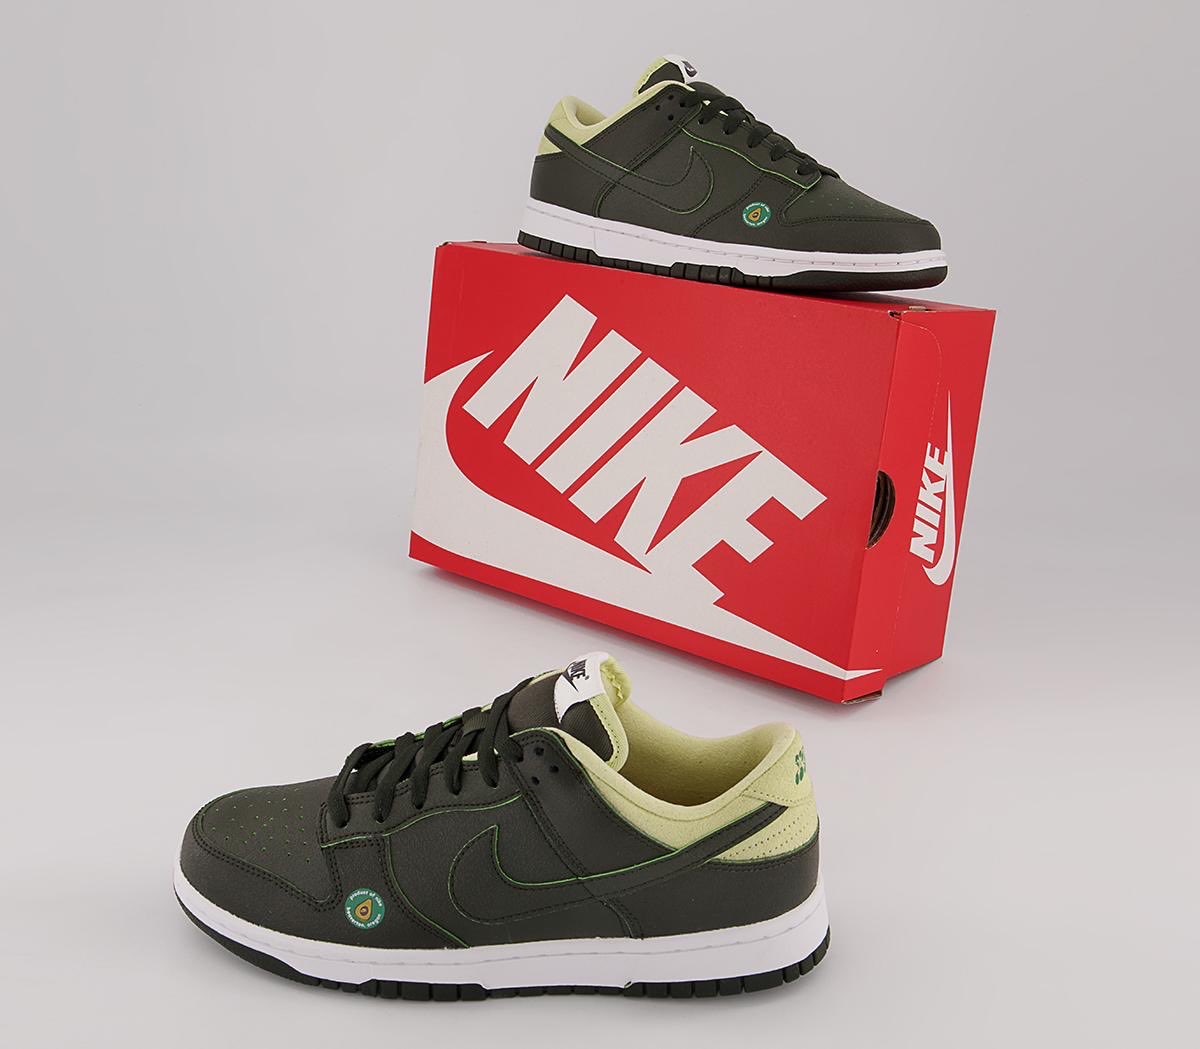 Nike Wmns Dunk Low LX “Avocado”が国内5月28日に発売予定 | UP TO DATE